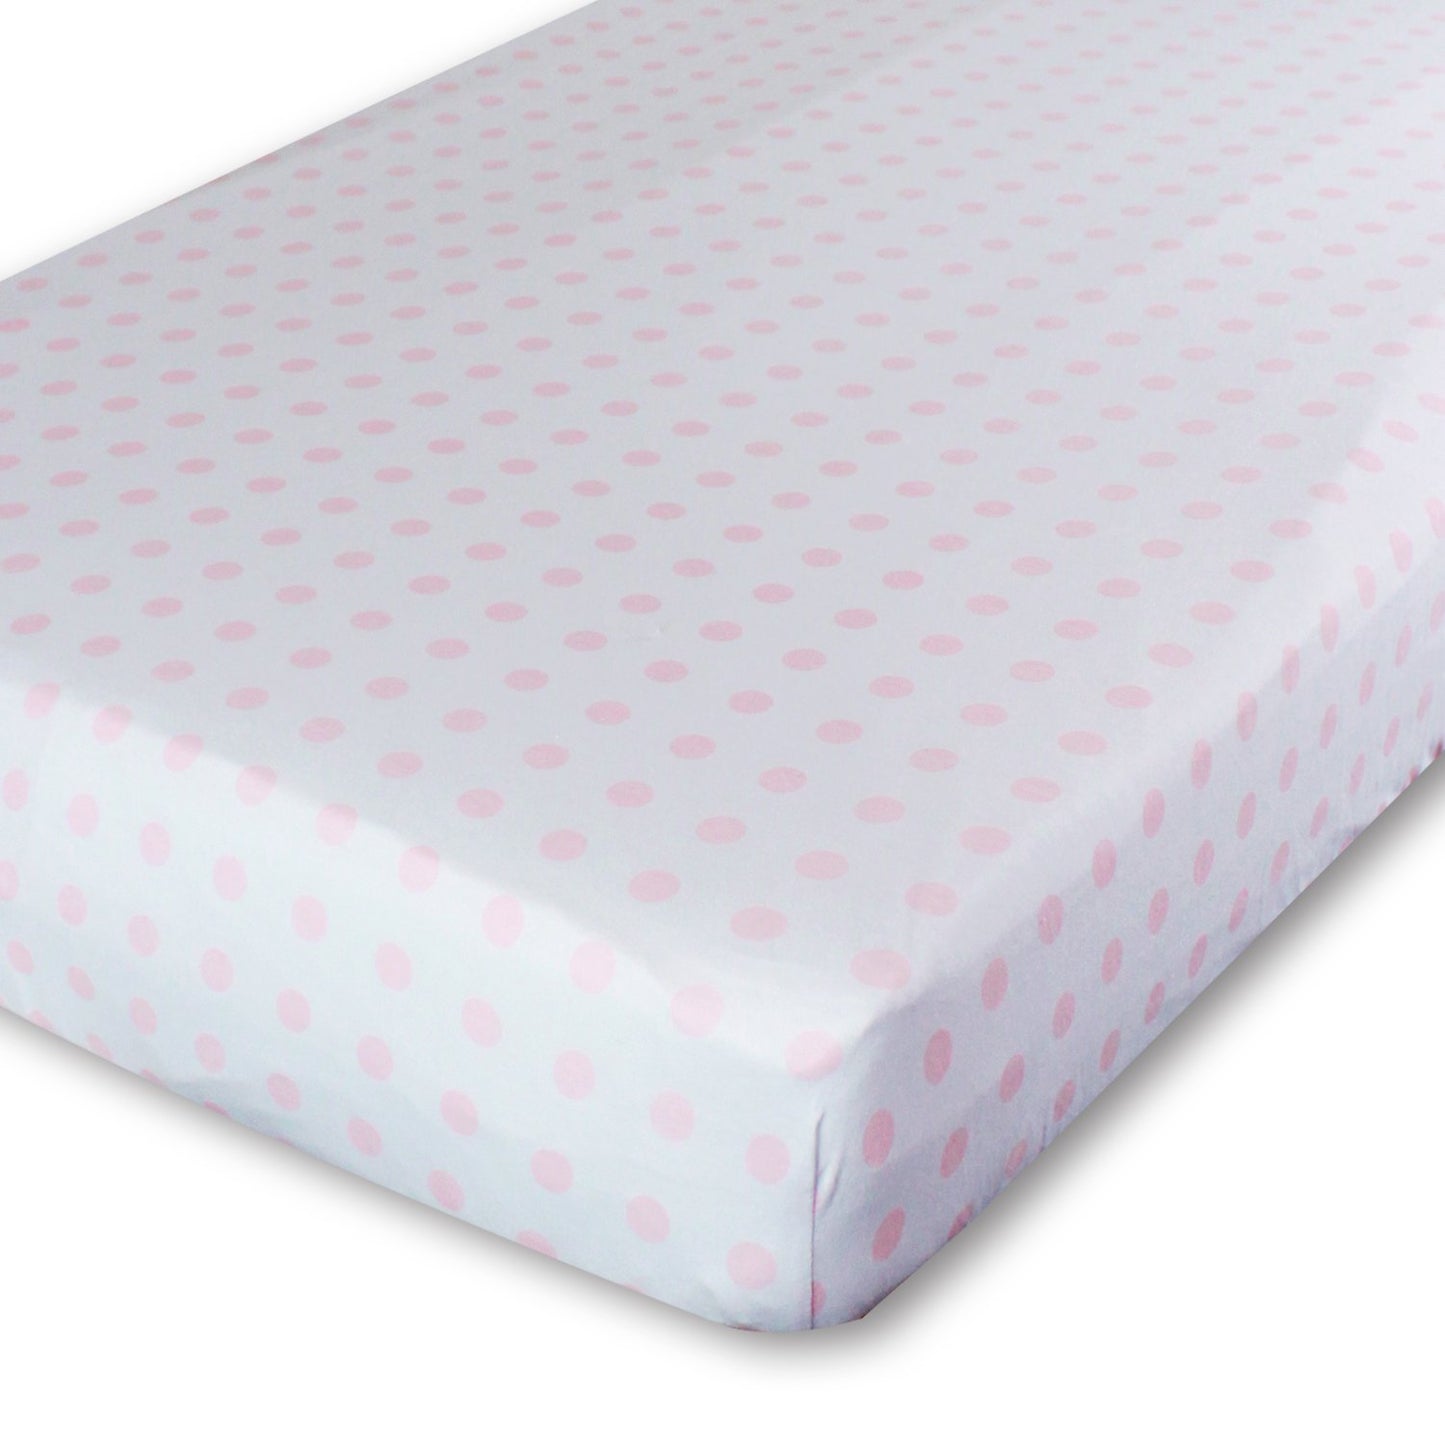 Toddler Bedding Fitted Jersey Cotton (2 Pack) Pink Polka Dot, Chevron